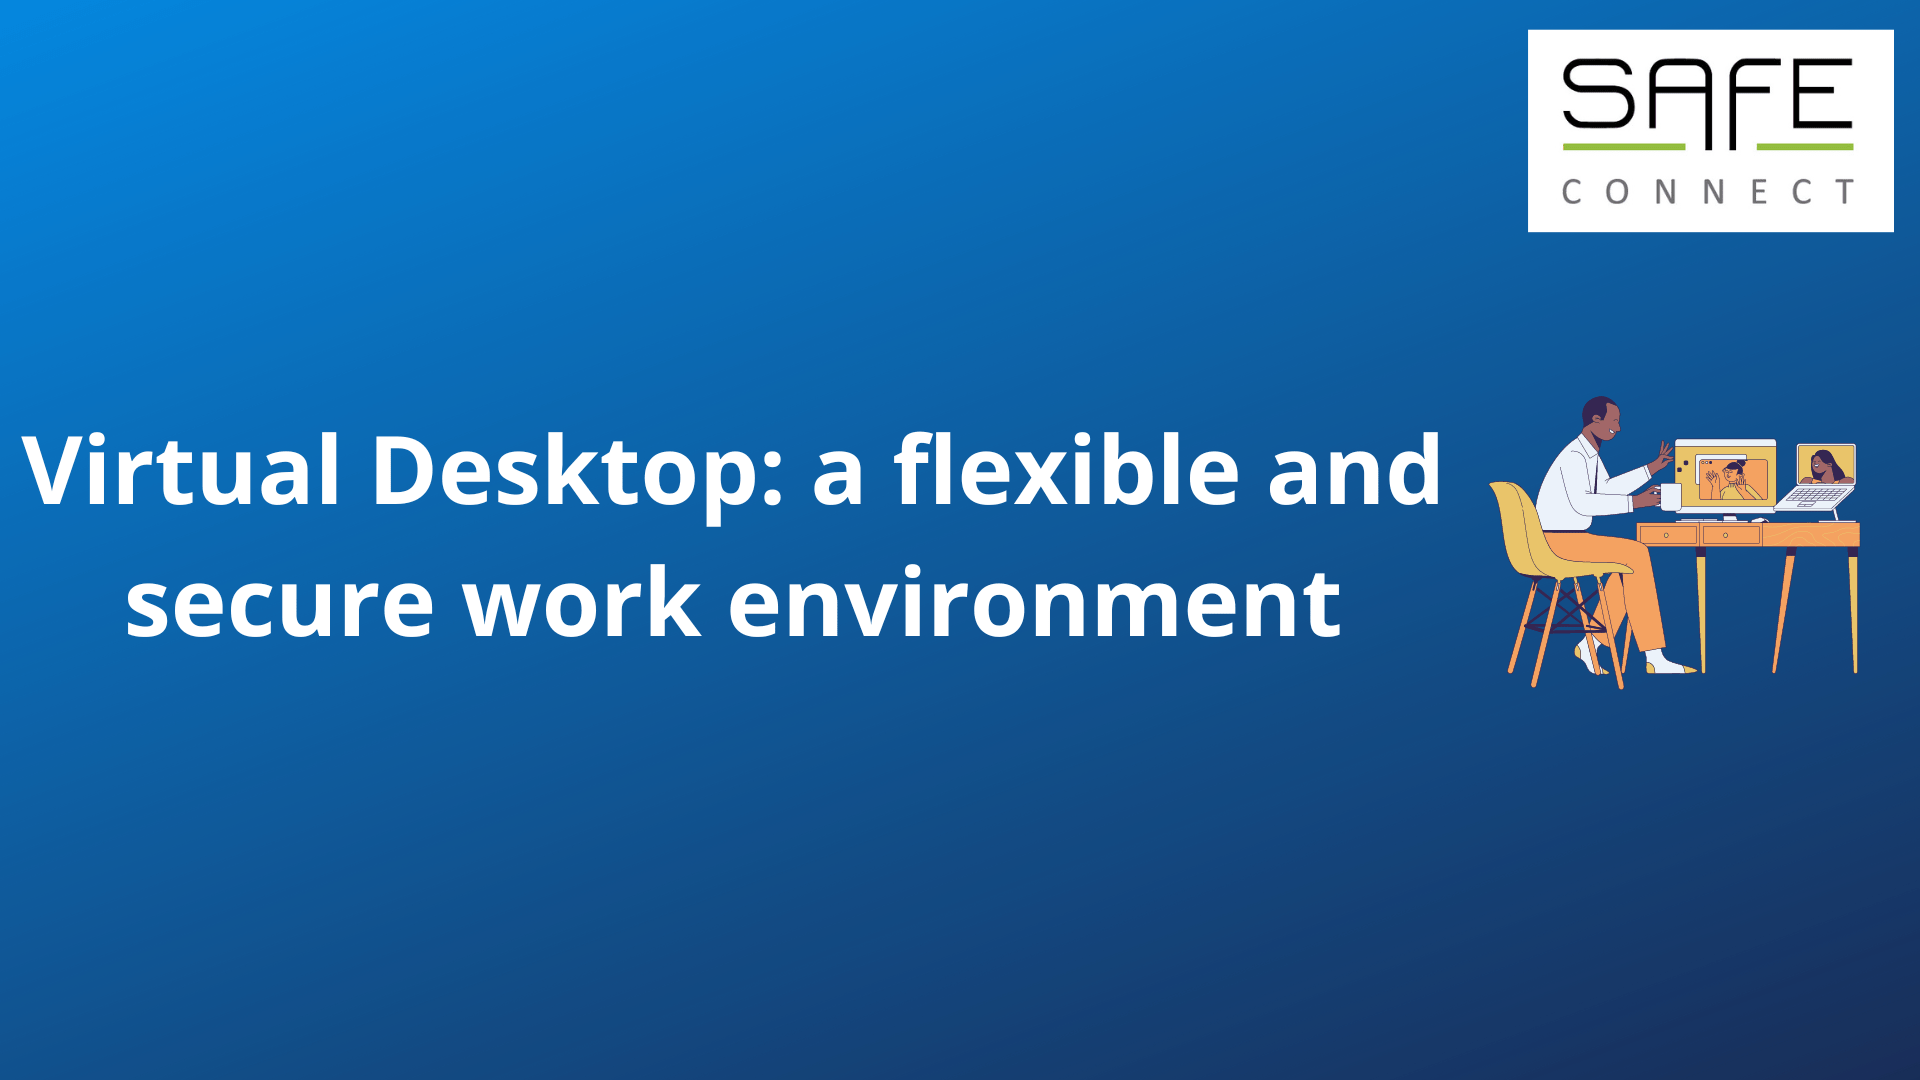 Virtual Desktop: the solution for a flexible and secure work environment